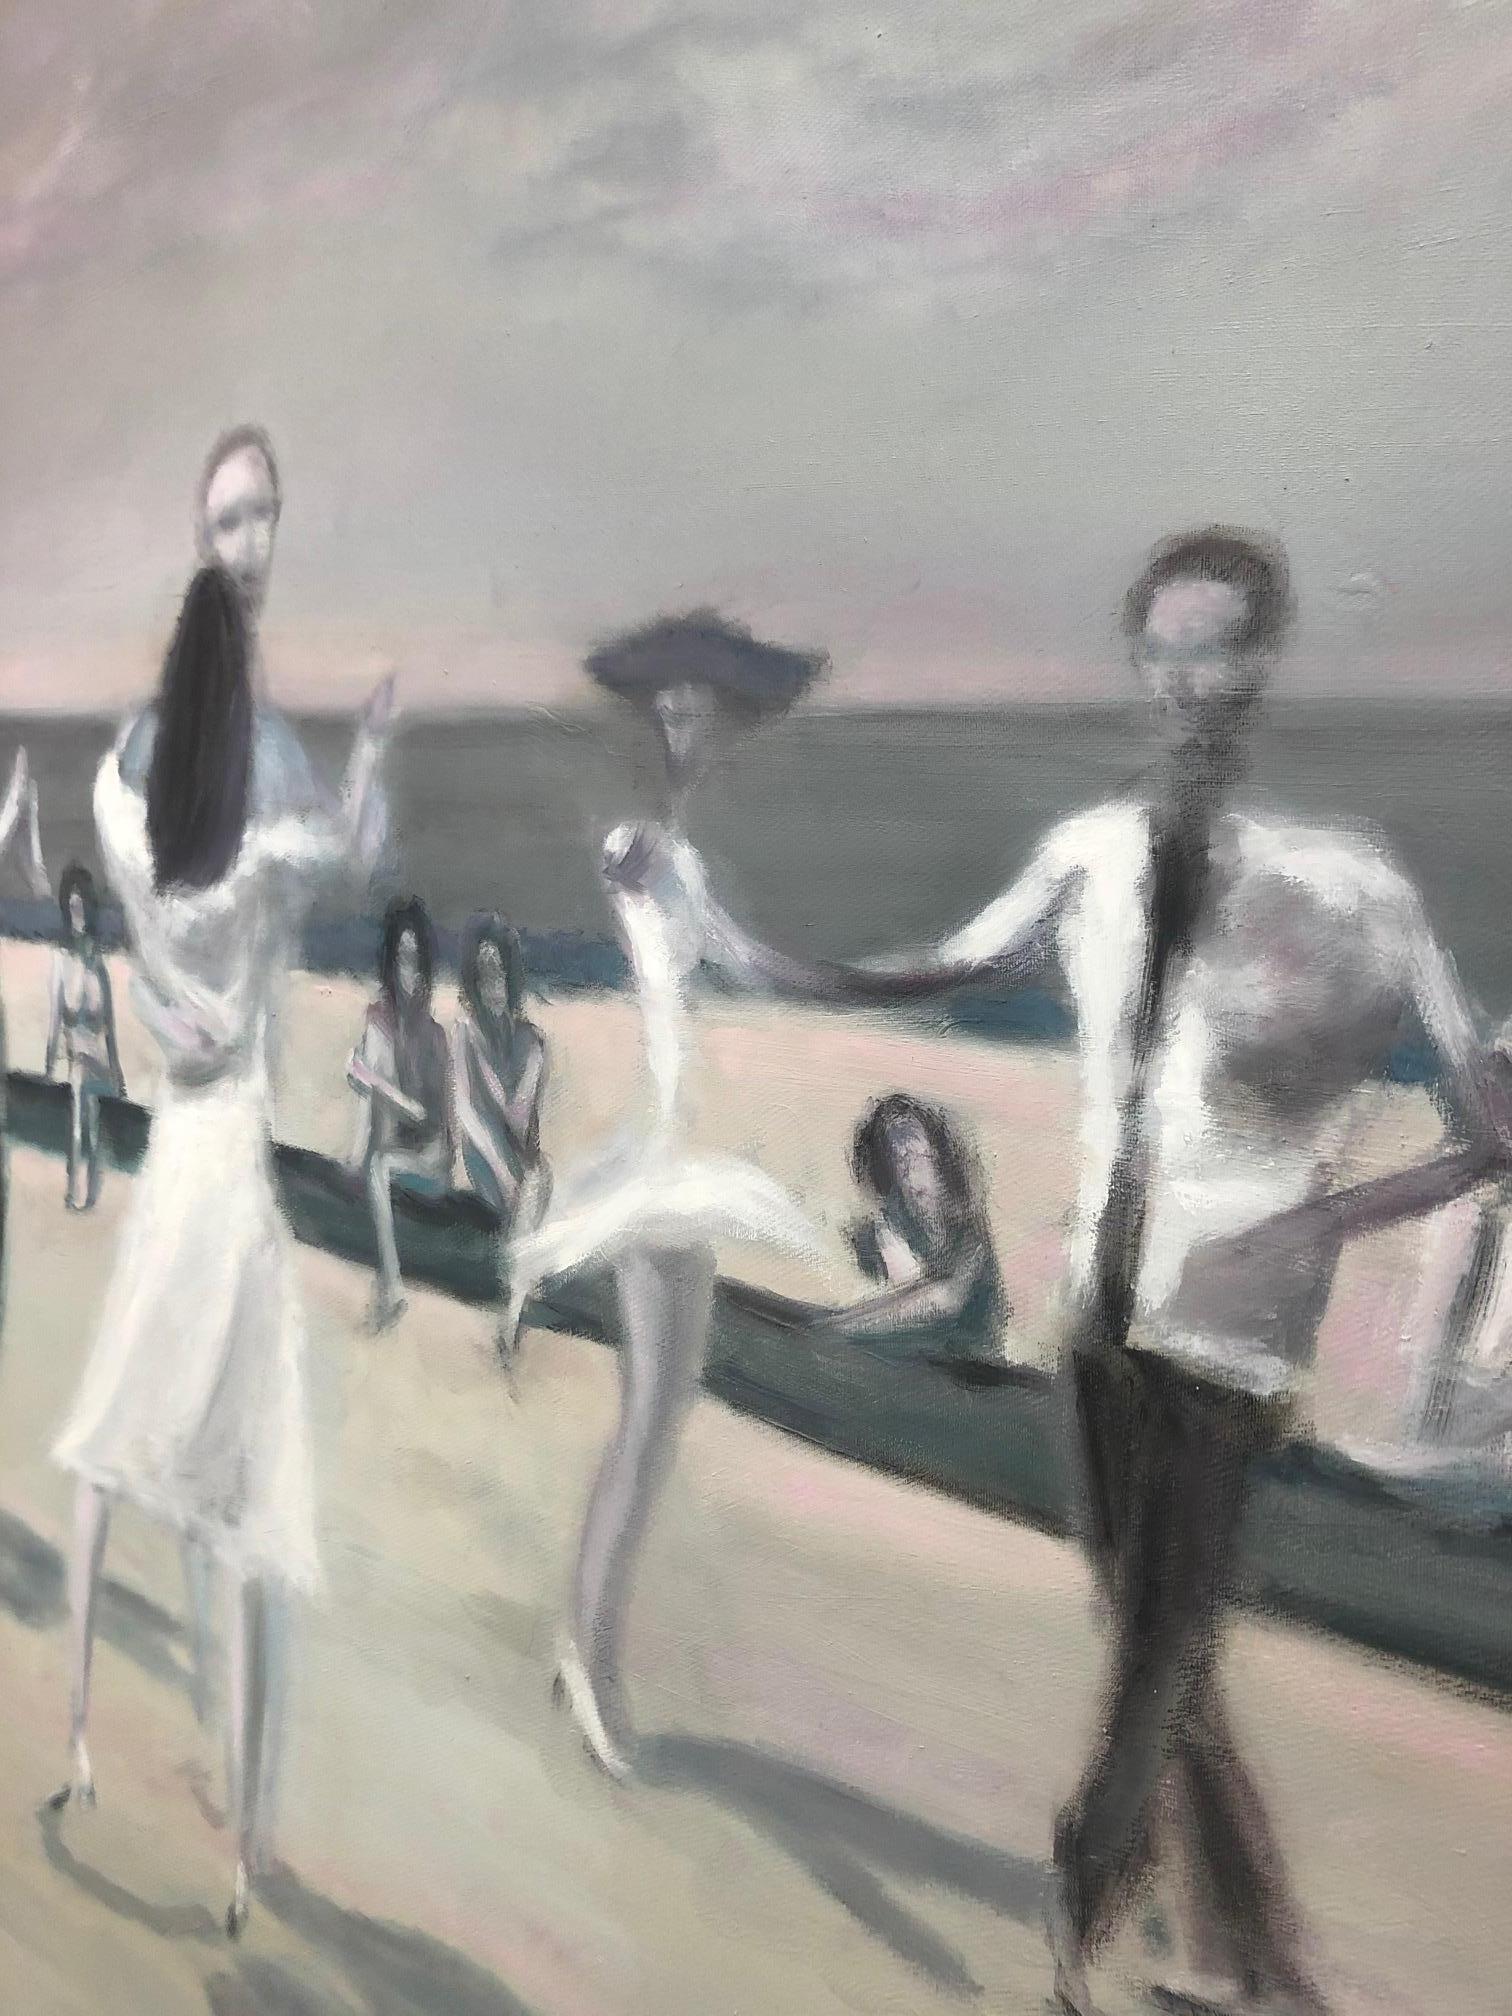 The Latest Balboa - contemporary dance scene on beach, oil, figurative painting - Painting by Michael Pröpper